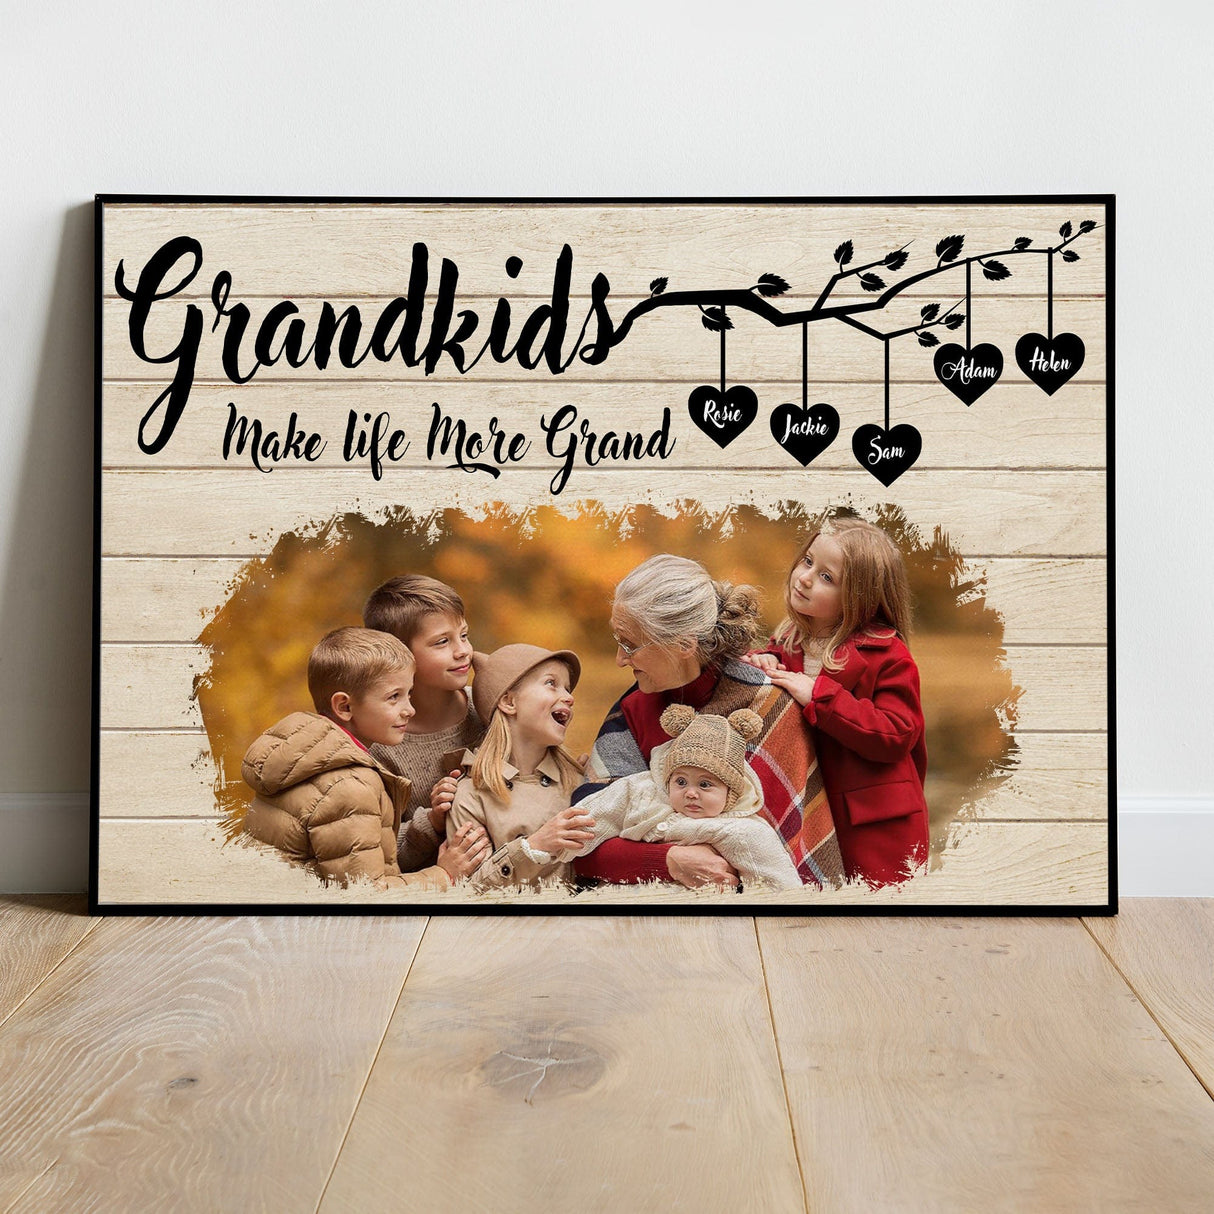 Posters, Prints, & Visual Artwork Personalized Mother's Day Grandkids Make Life More Grand - Custom Photo & Name Poster Canvas Print